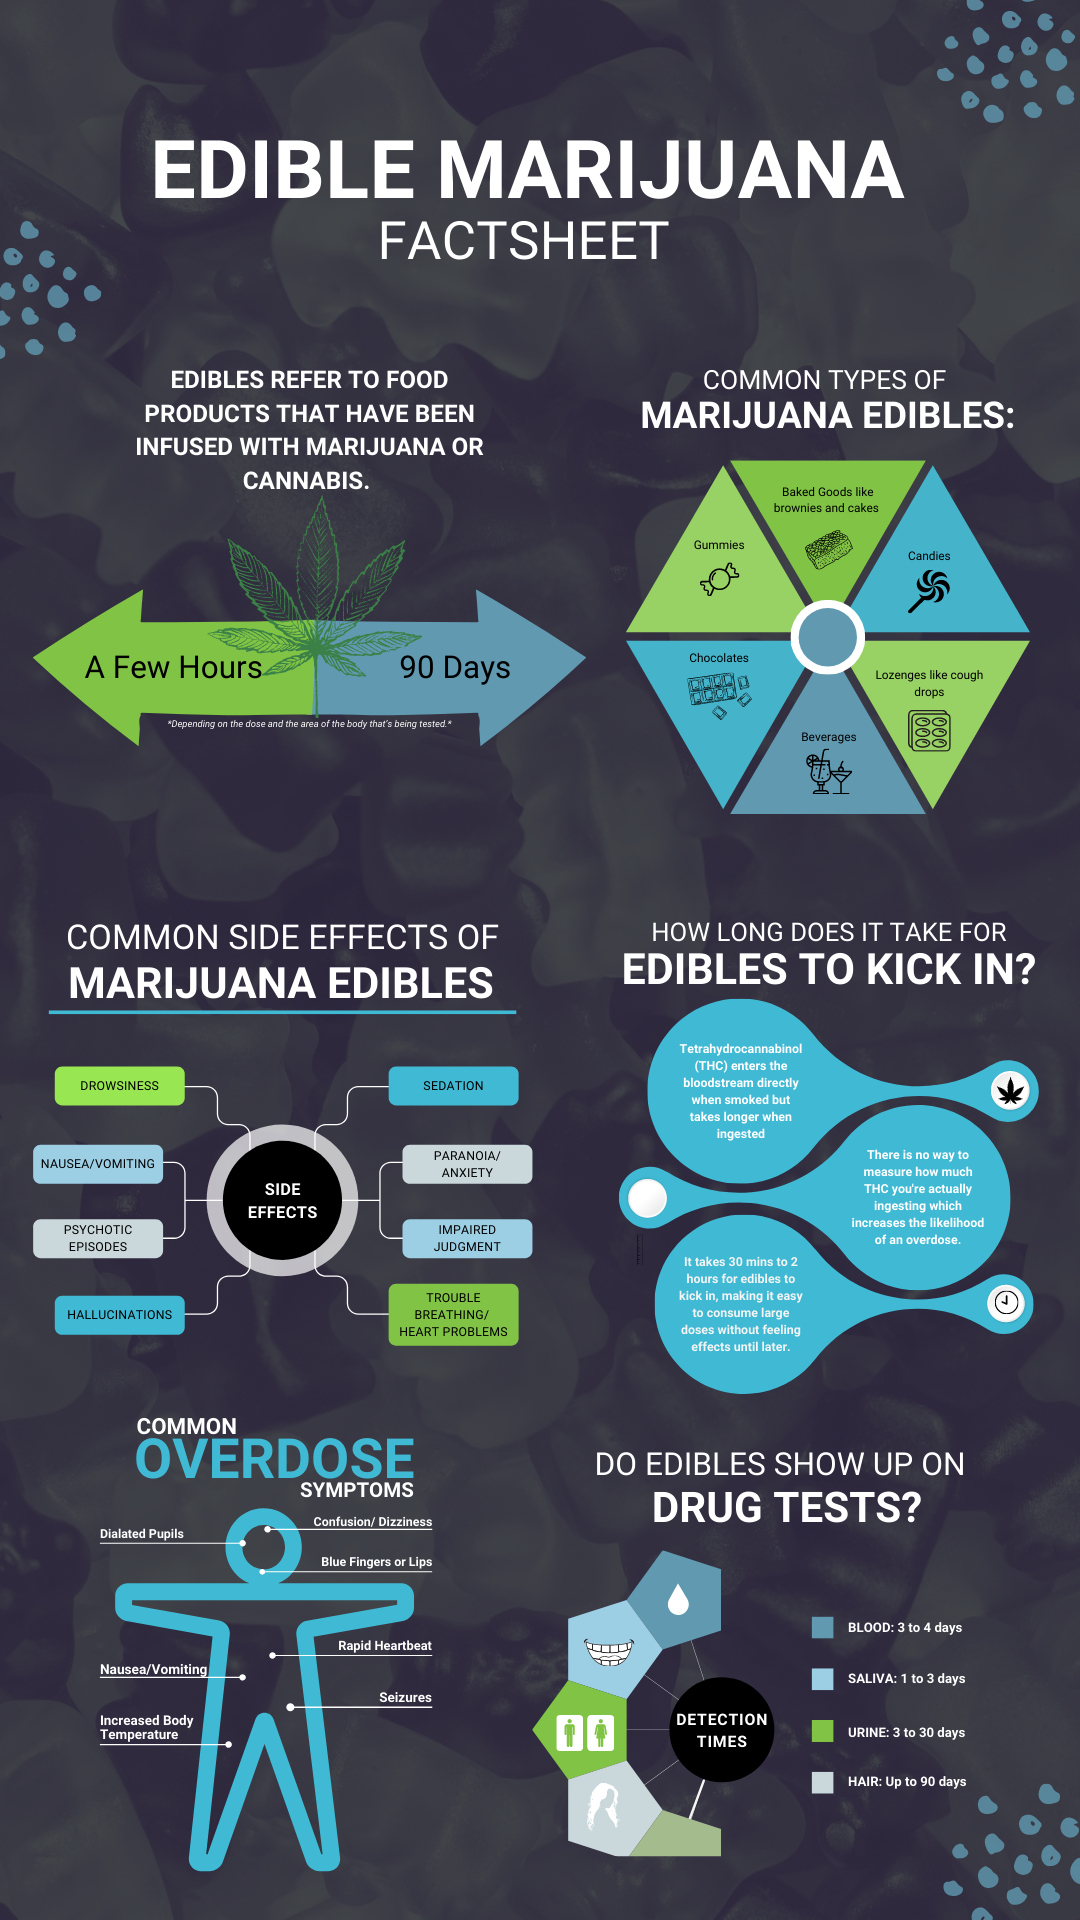 How Long Do Edibles Stay in Your System?